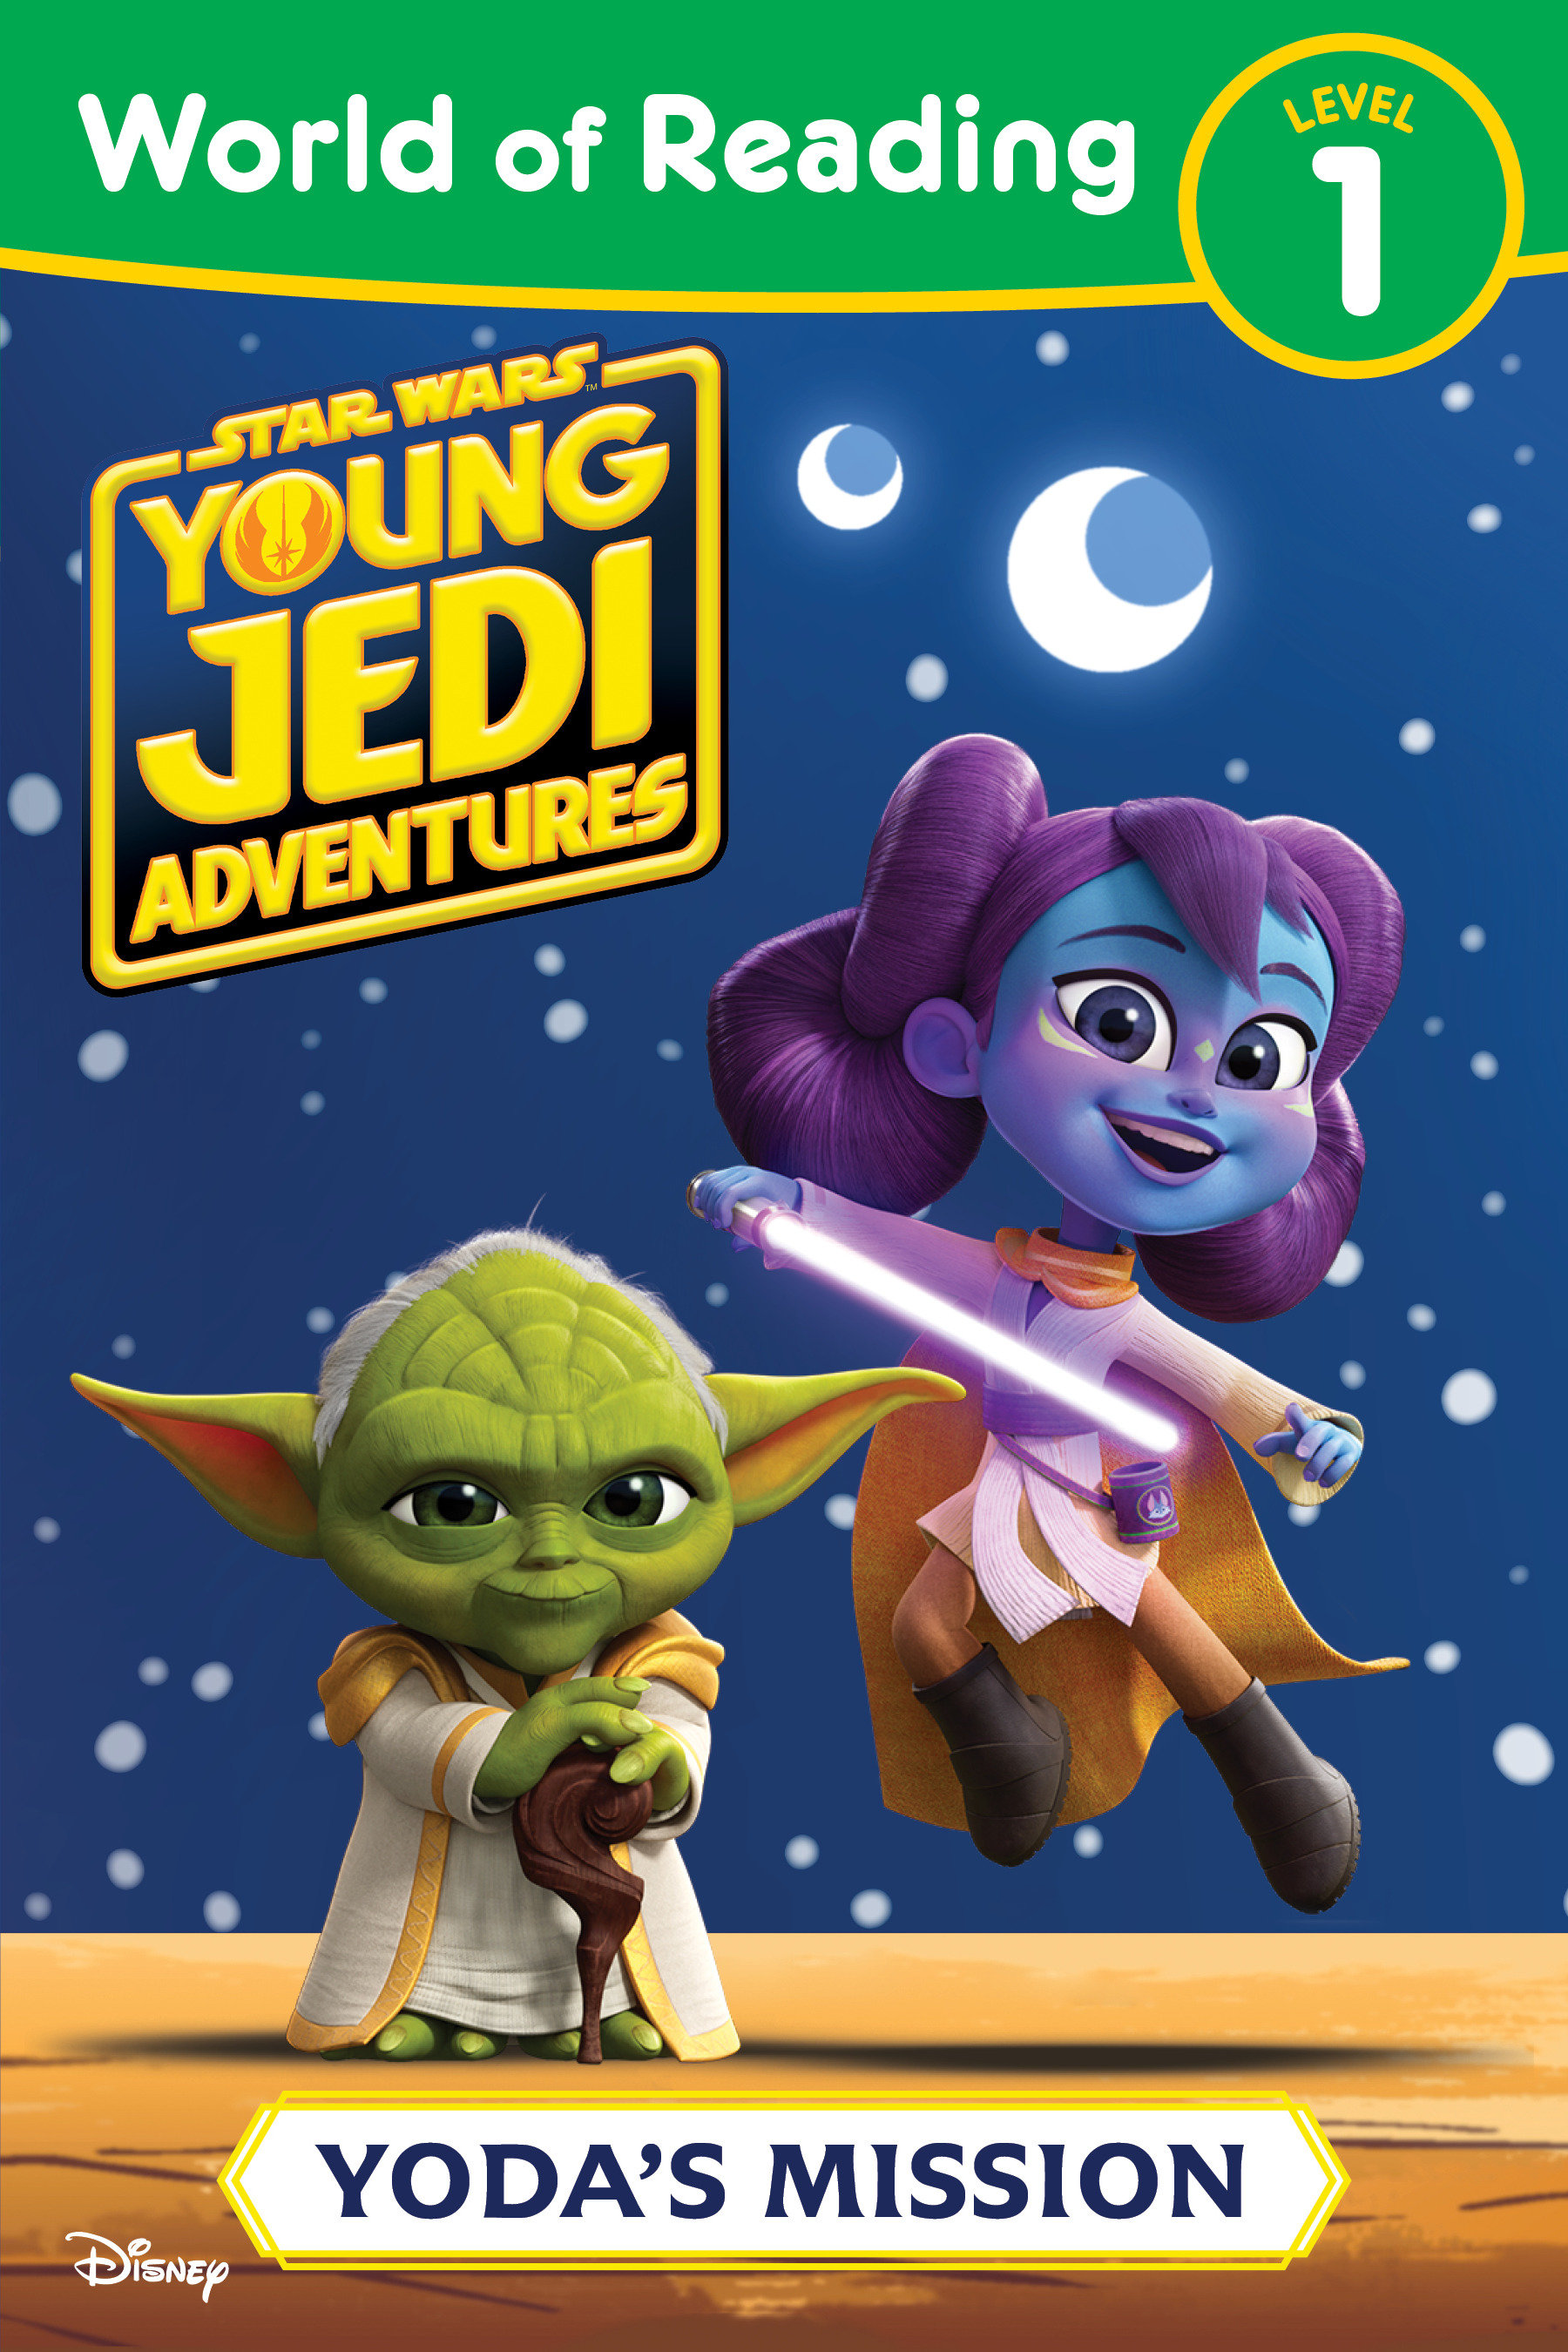 Star Wars Young Jedi Adventures Wold of Reading Yoda's Mission